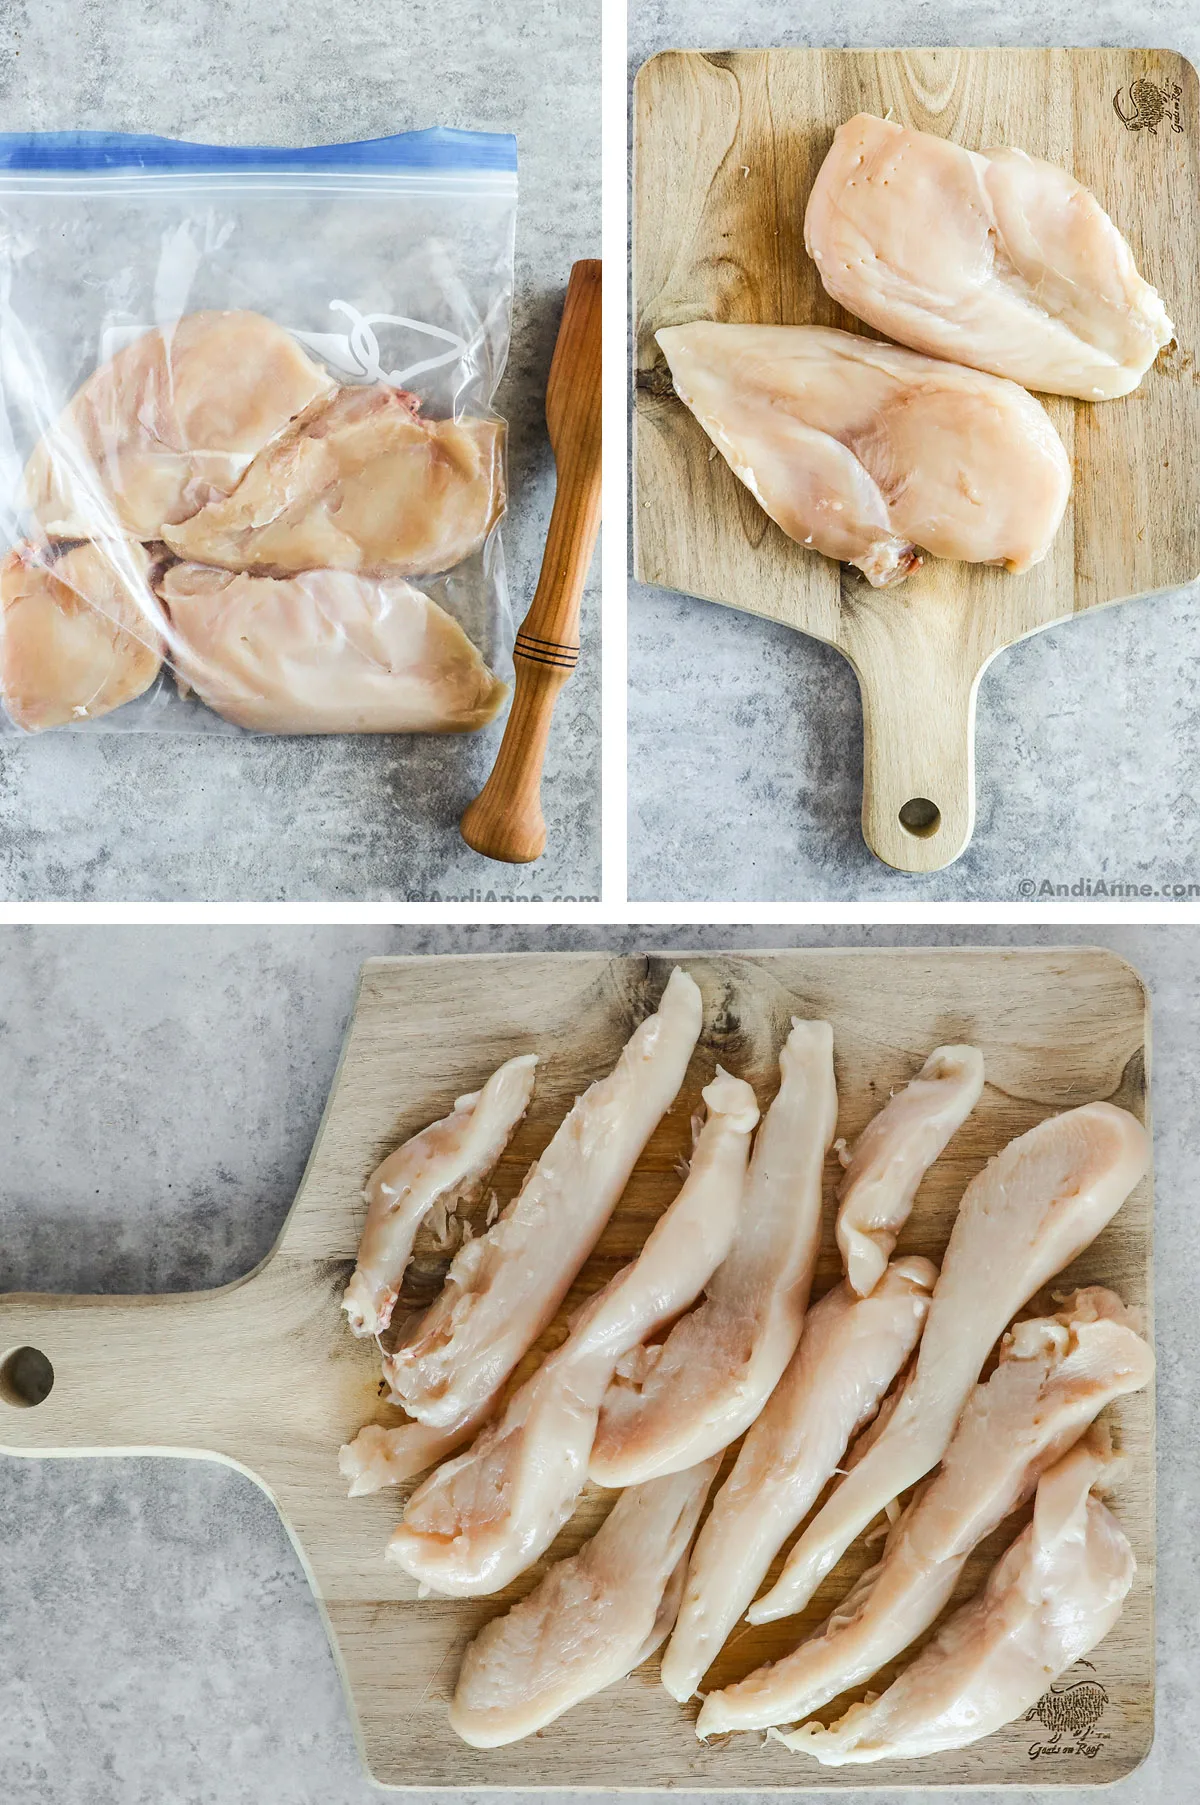 Three images grouped together, first is chicken in a bag and a mallet, second is raw chicken breasts on cutting board, third is sliced raw chicken on cutting board.